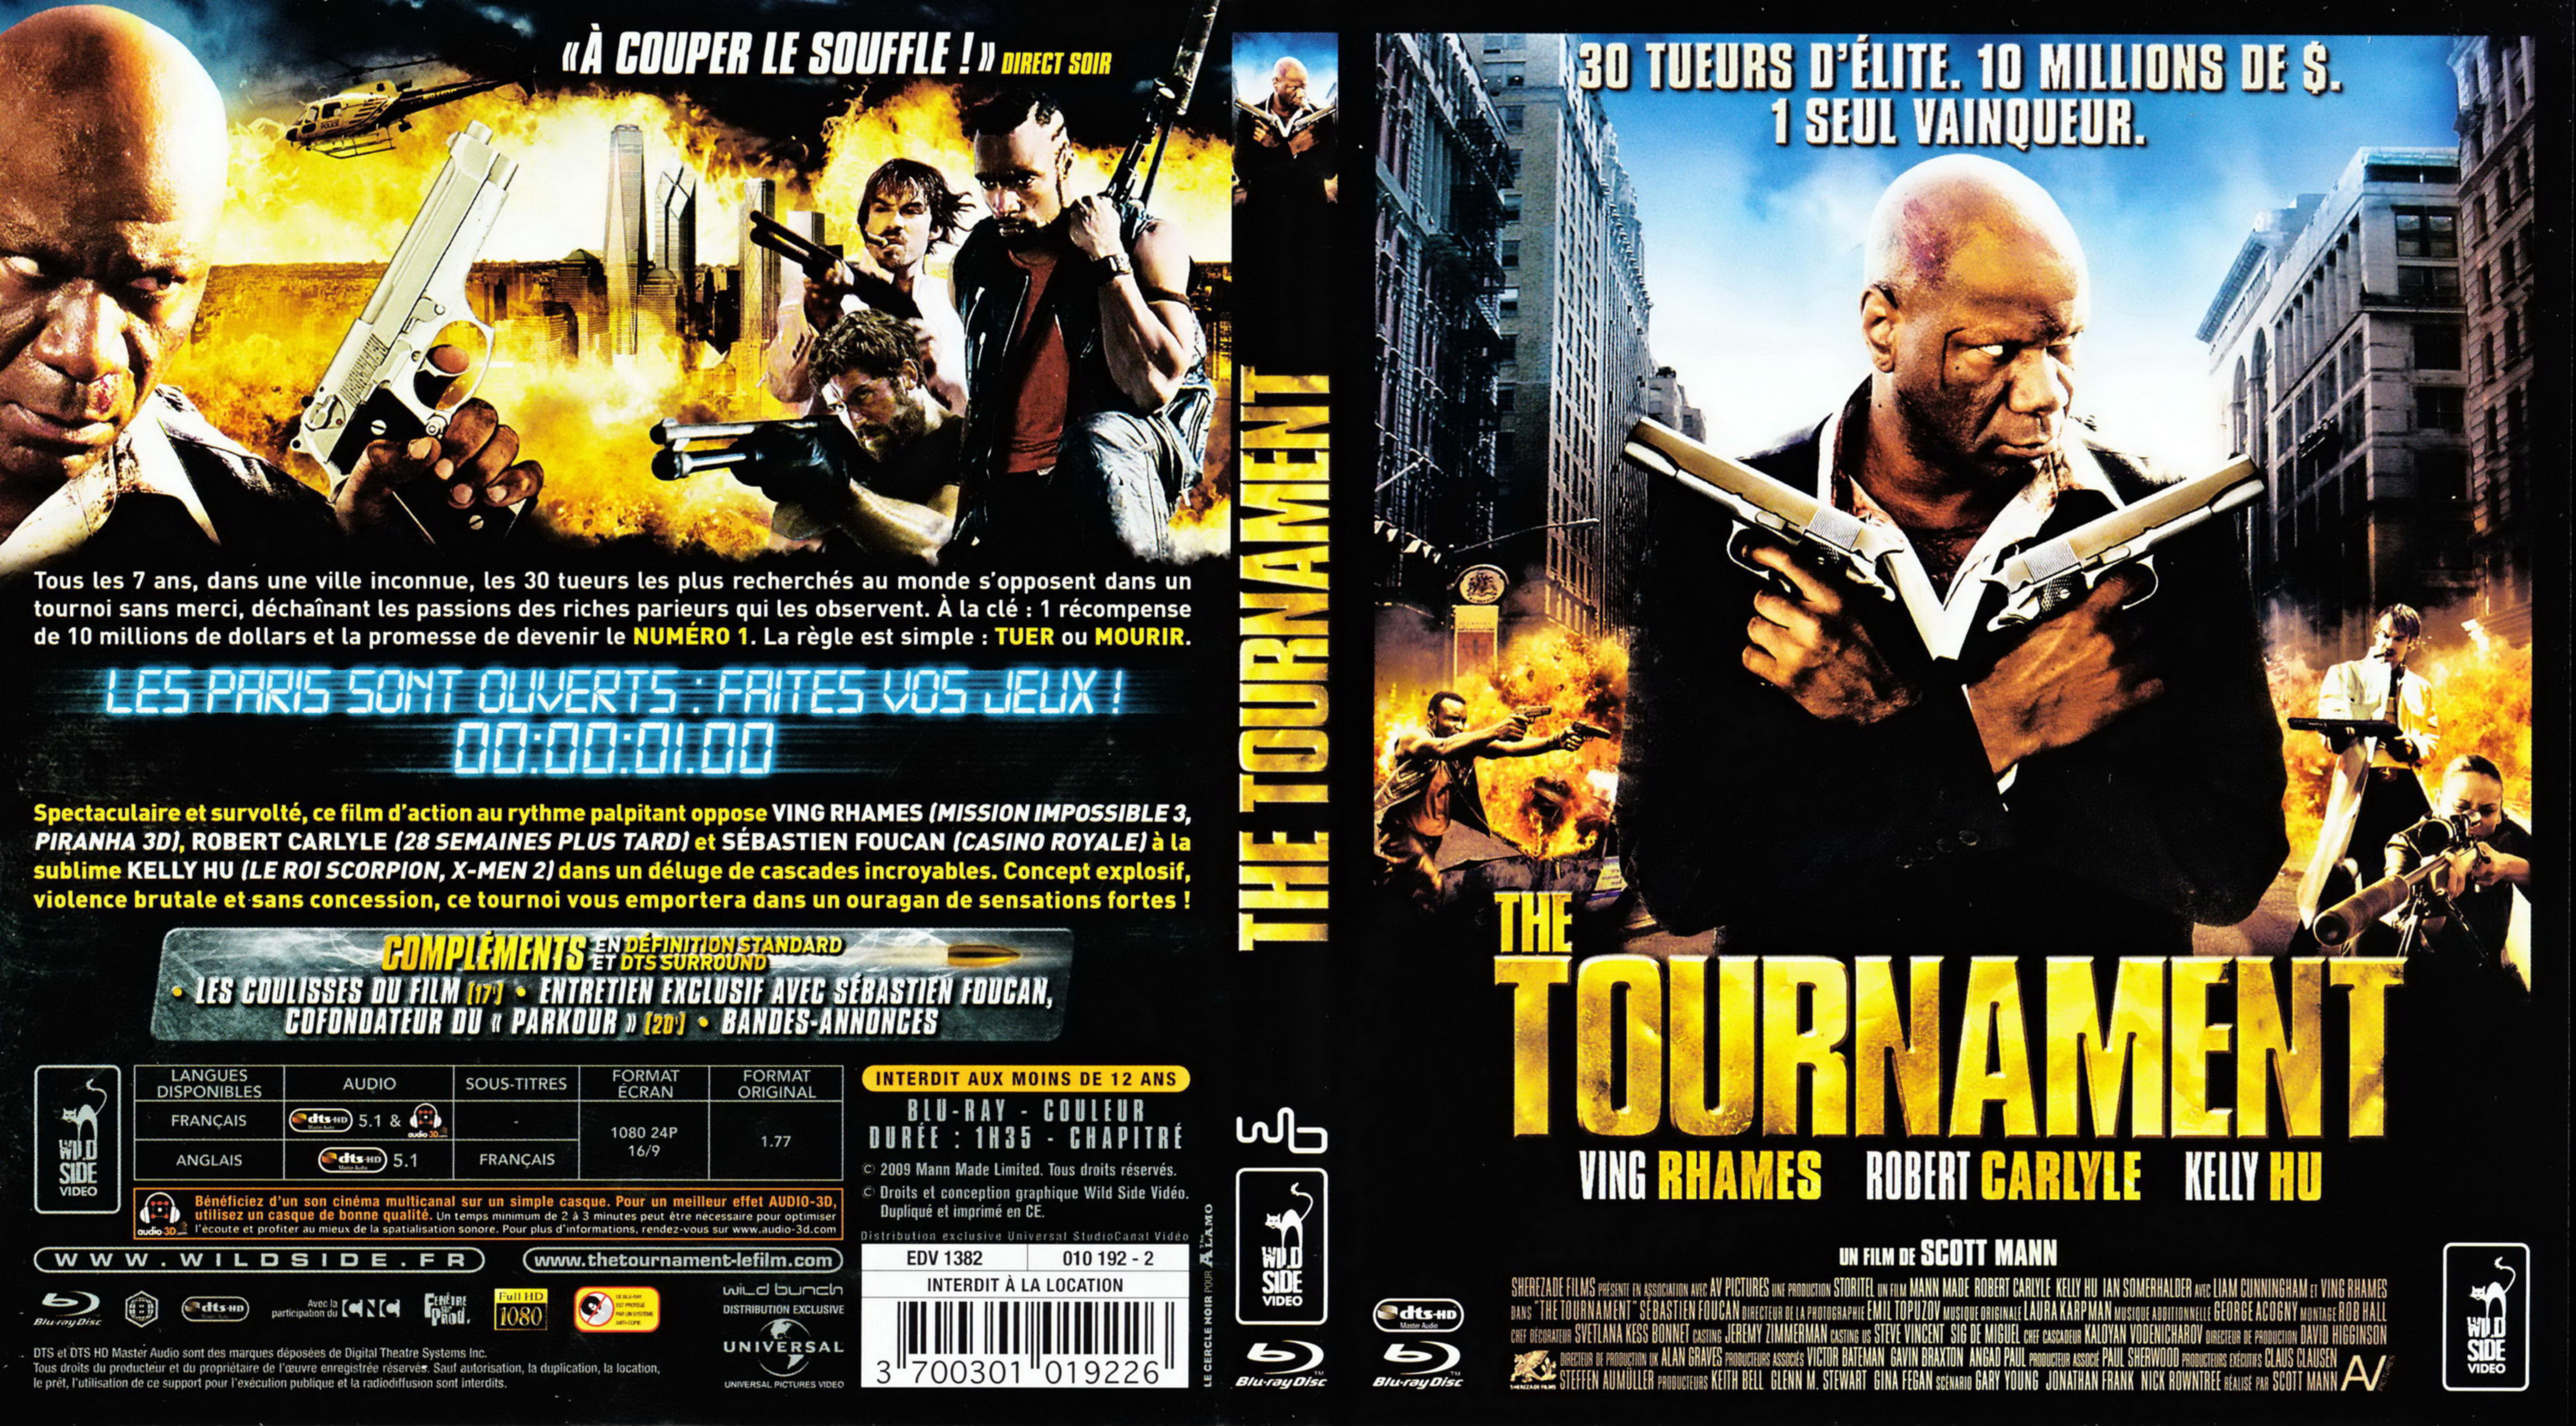 Jaquette DVD The tournament (BLU-RAY)